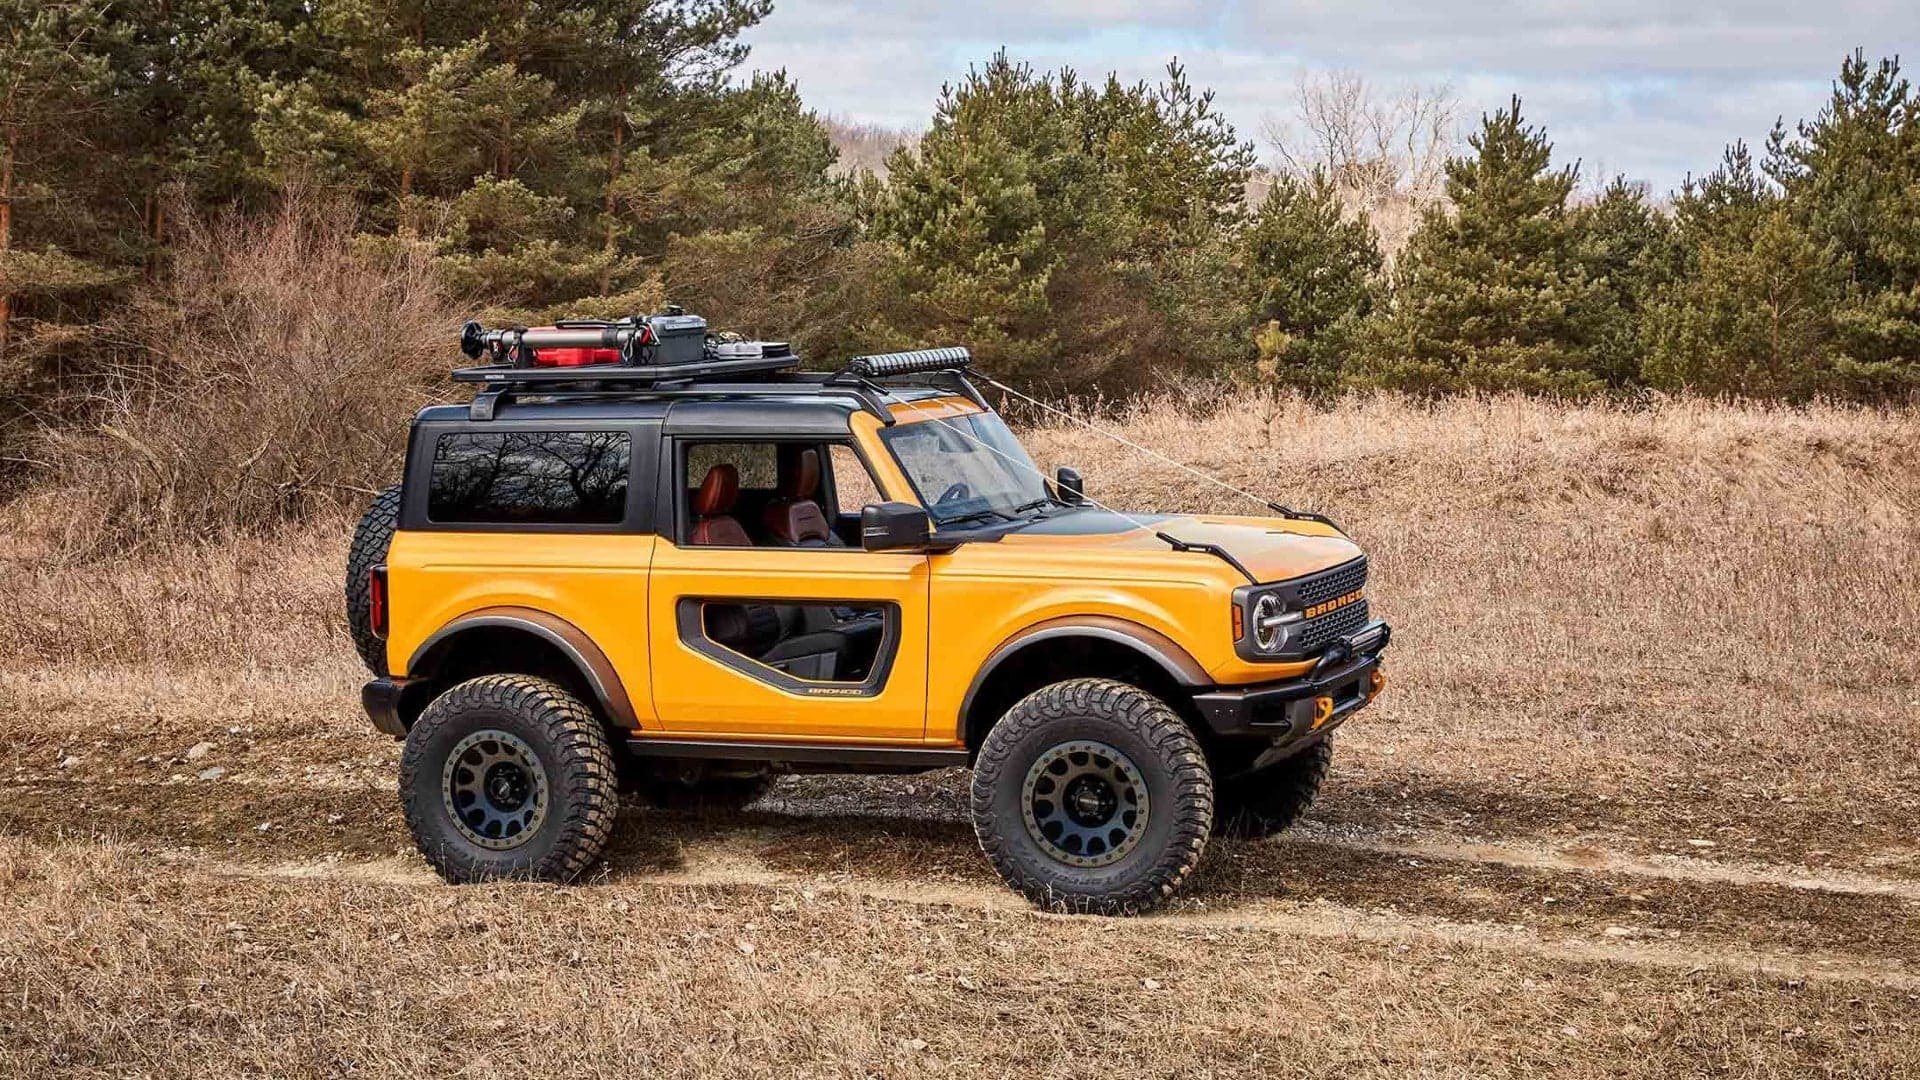 2021 Ford Bronco Accessory List Is Out: New Axle Ratios, Trail Armor, and More